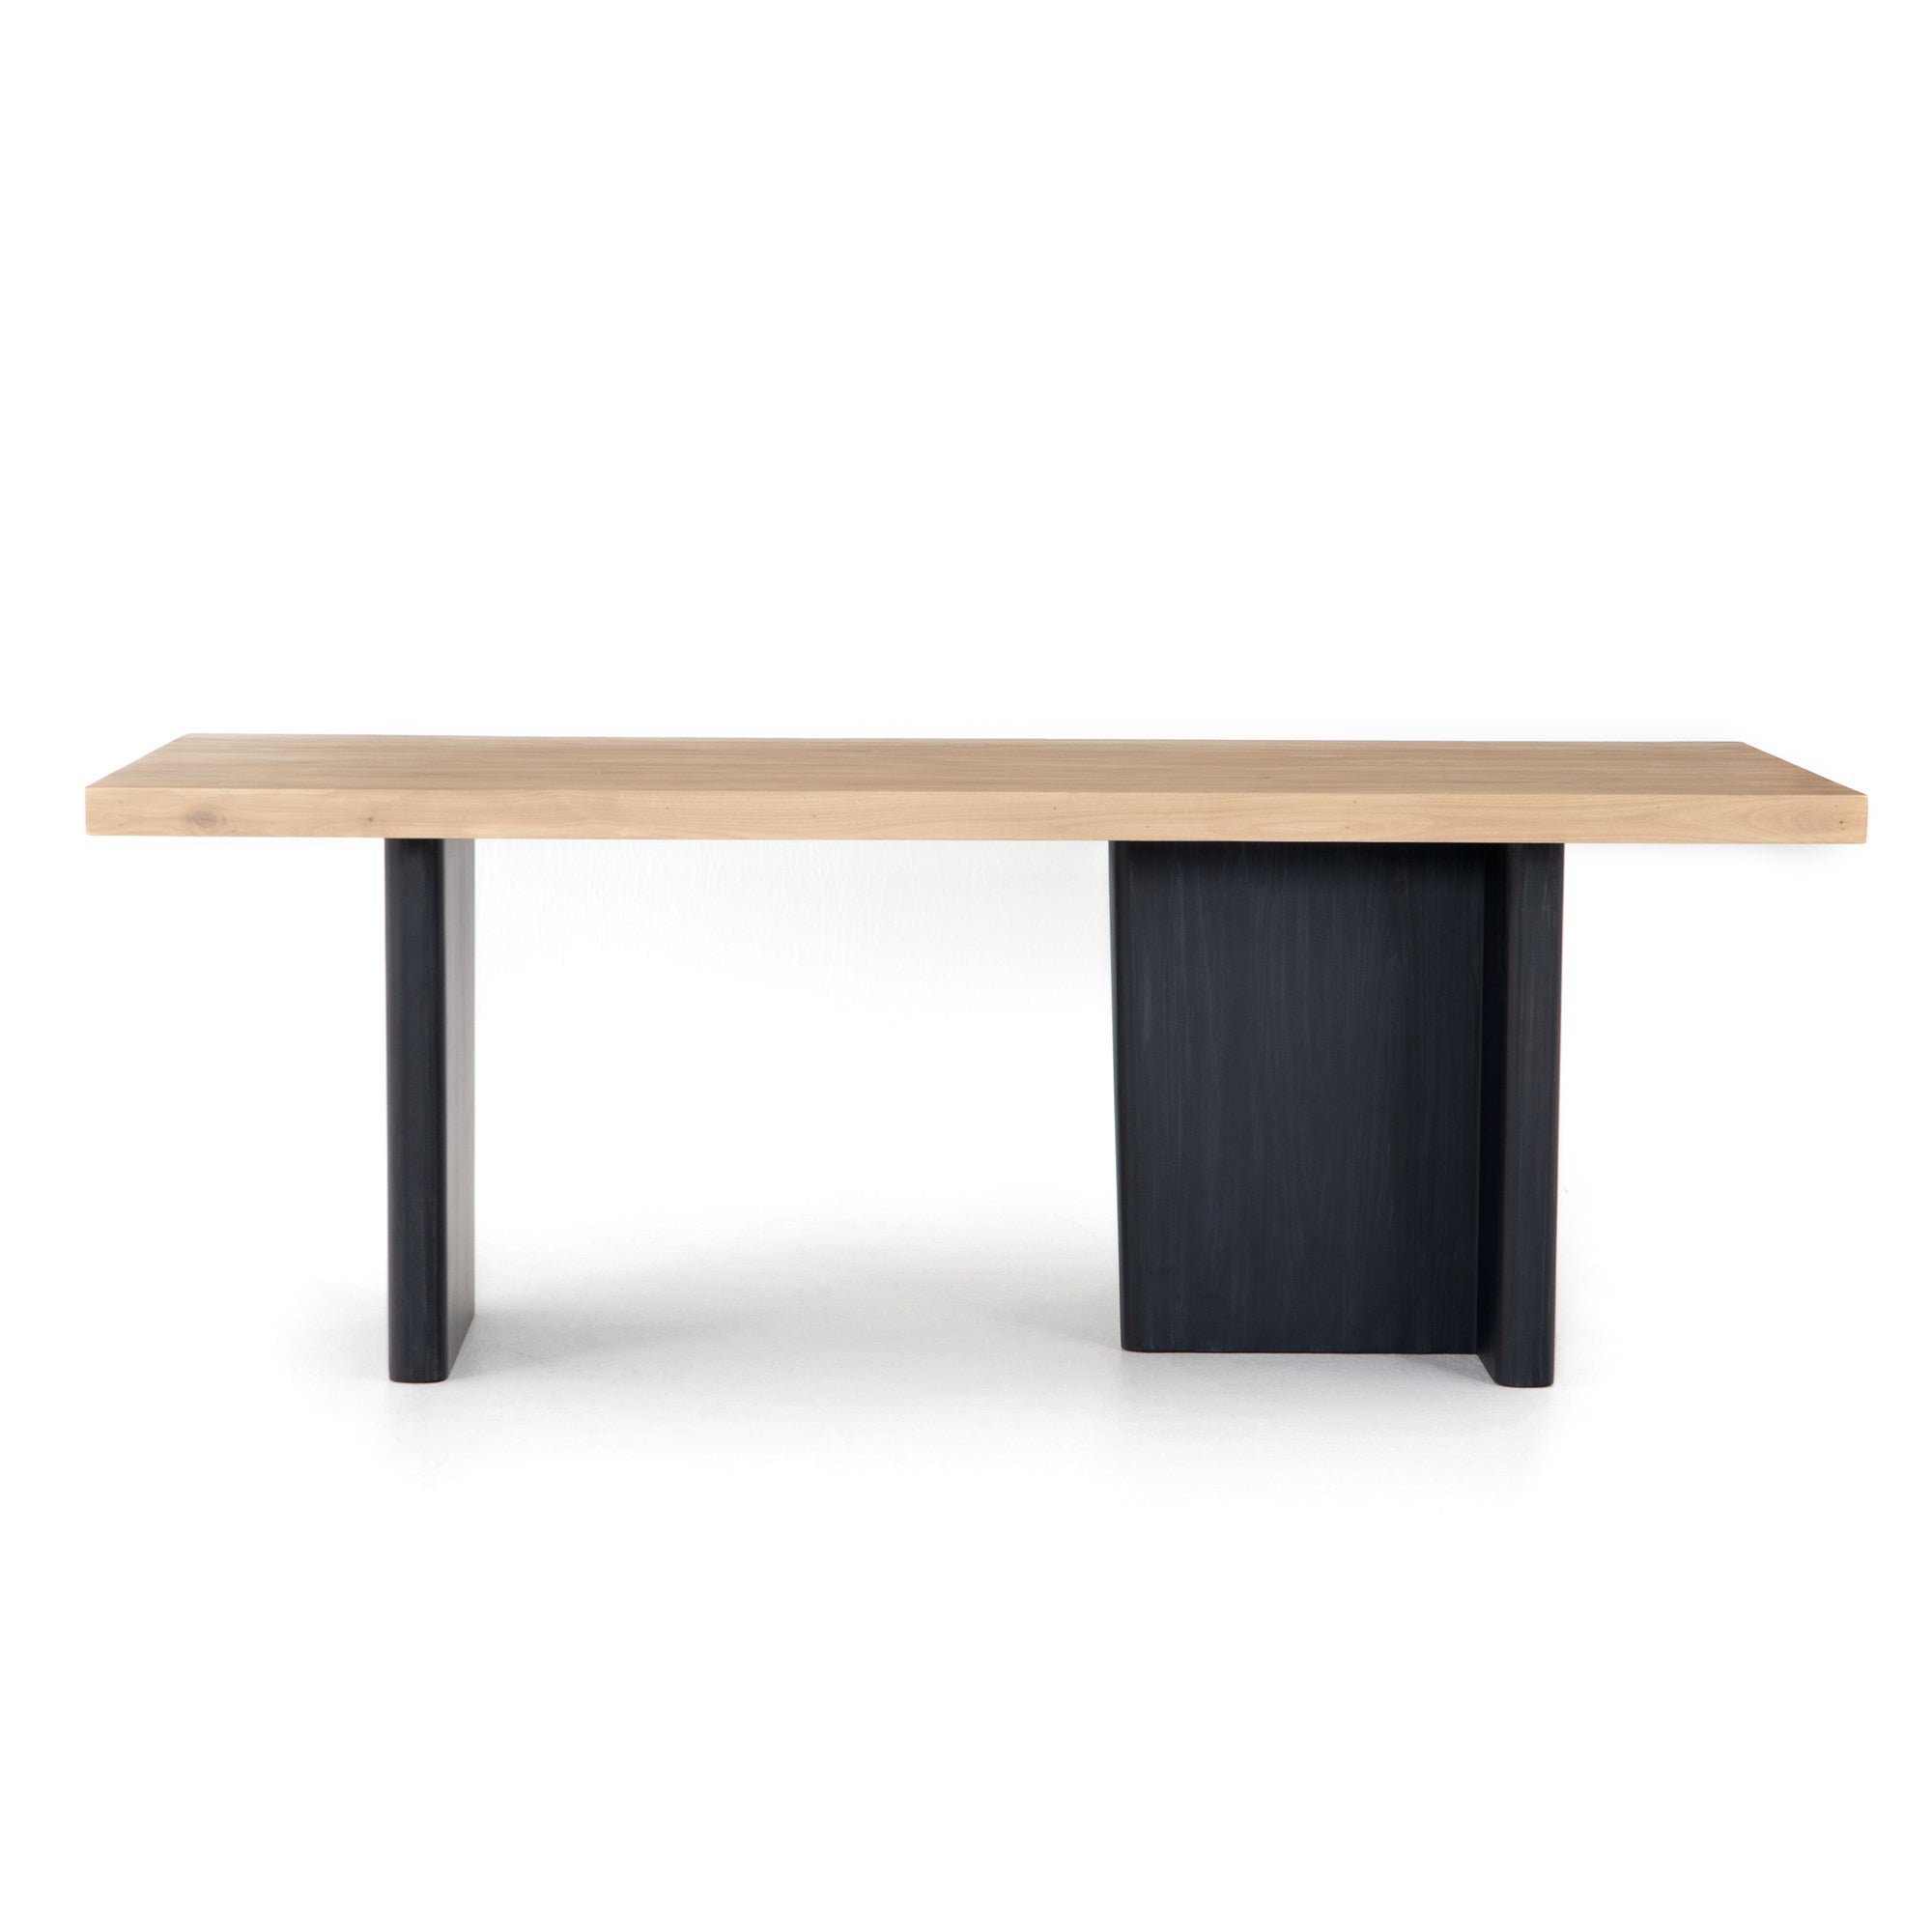 Ula Dining Table